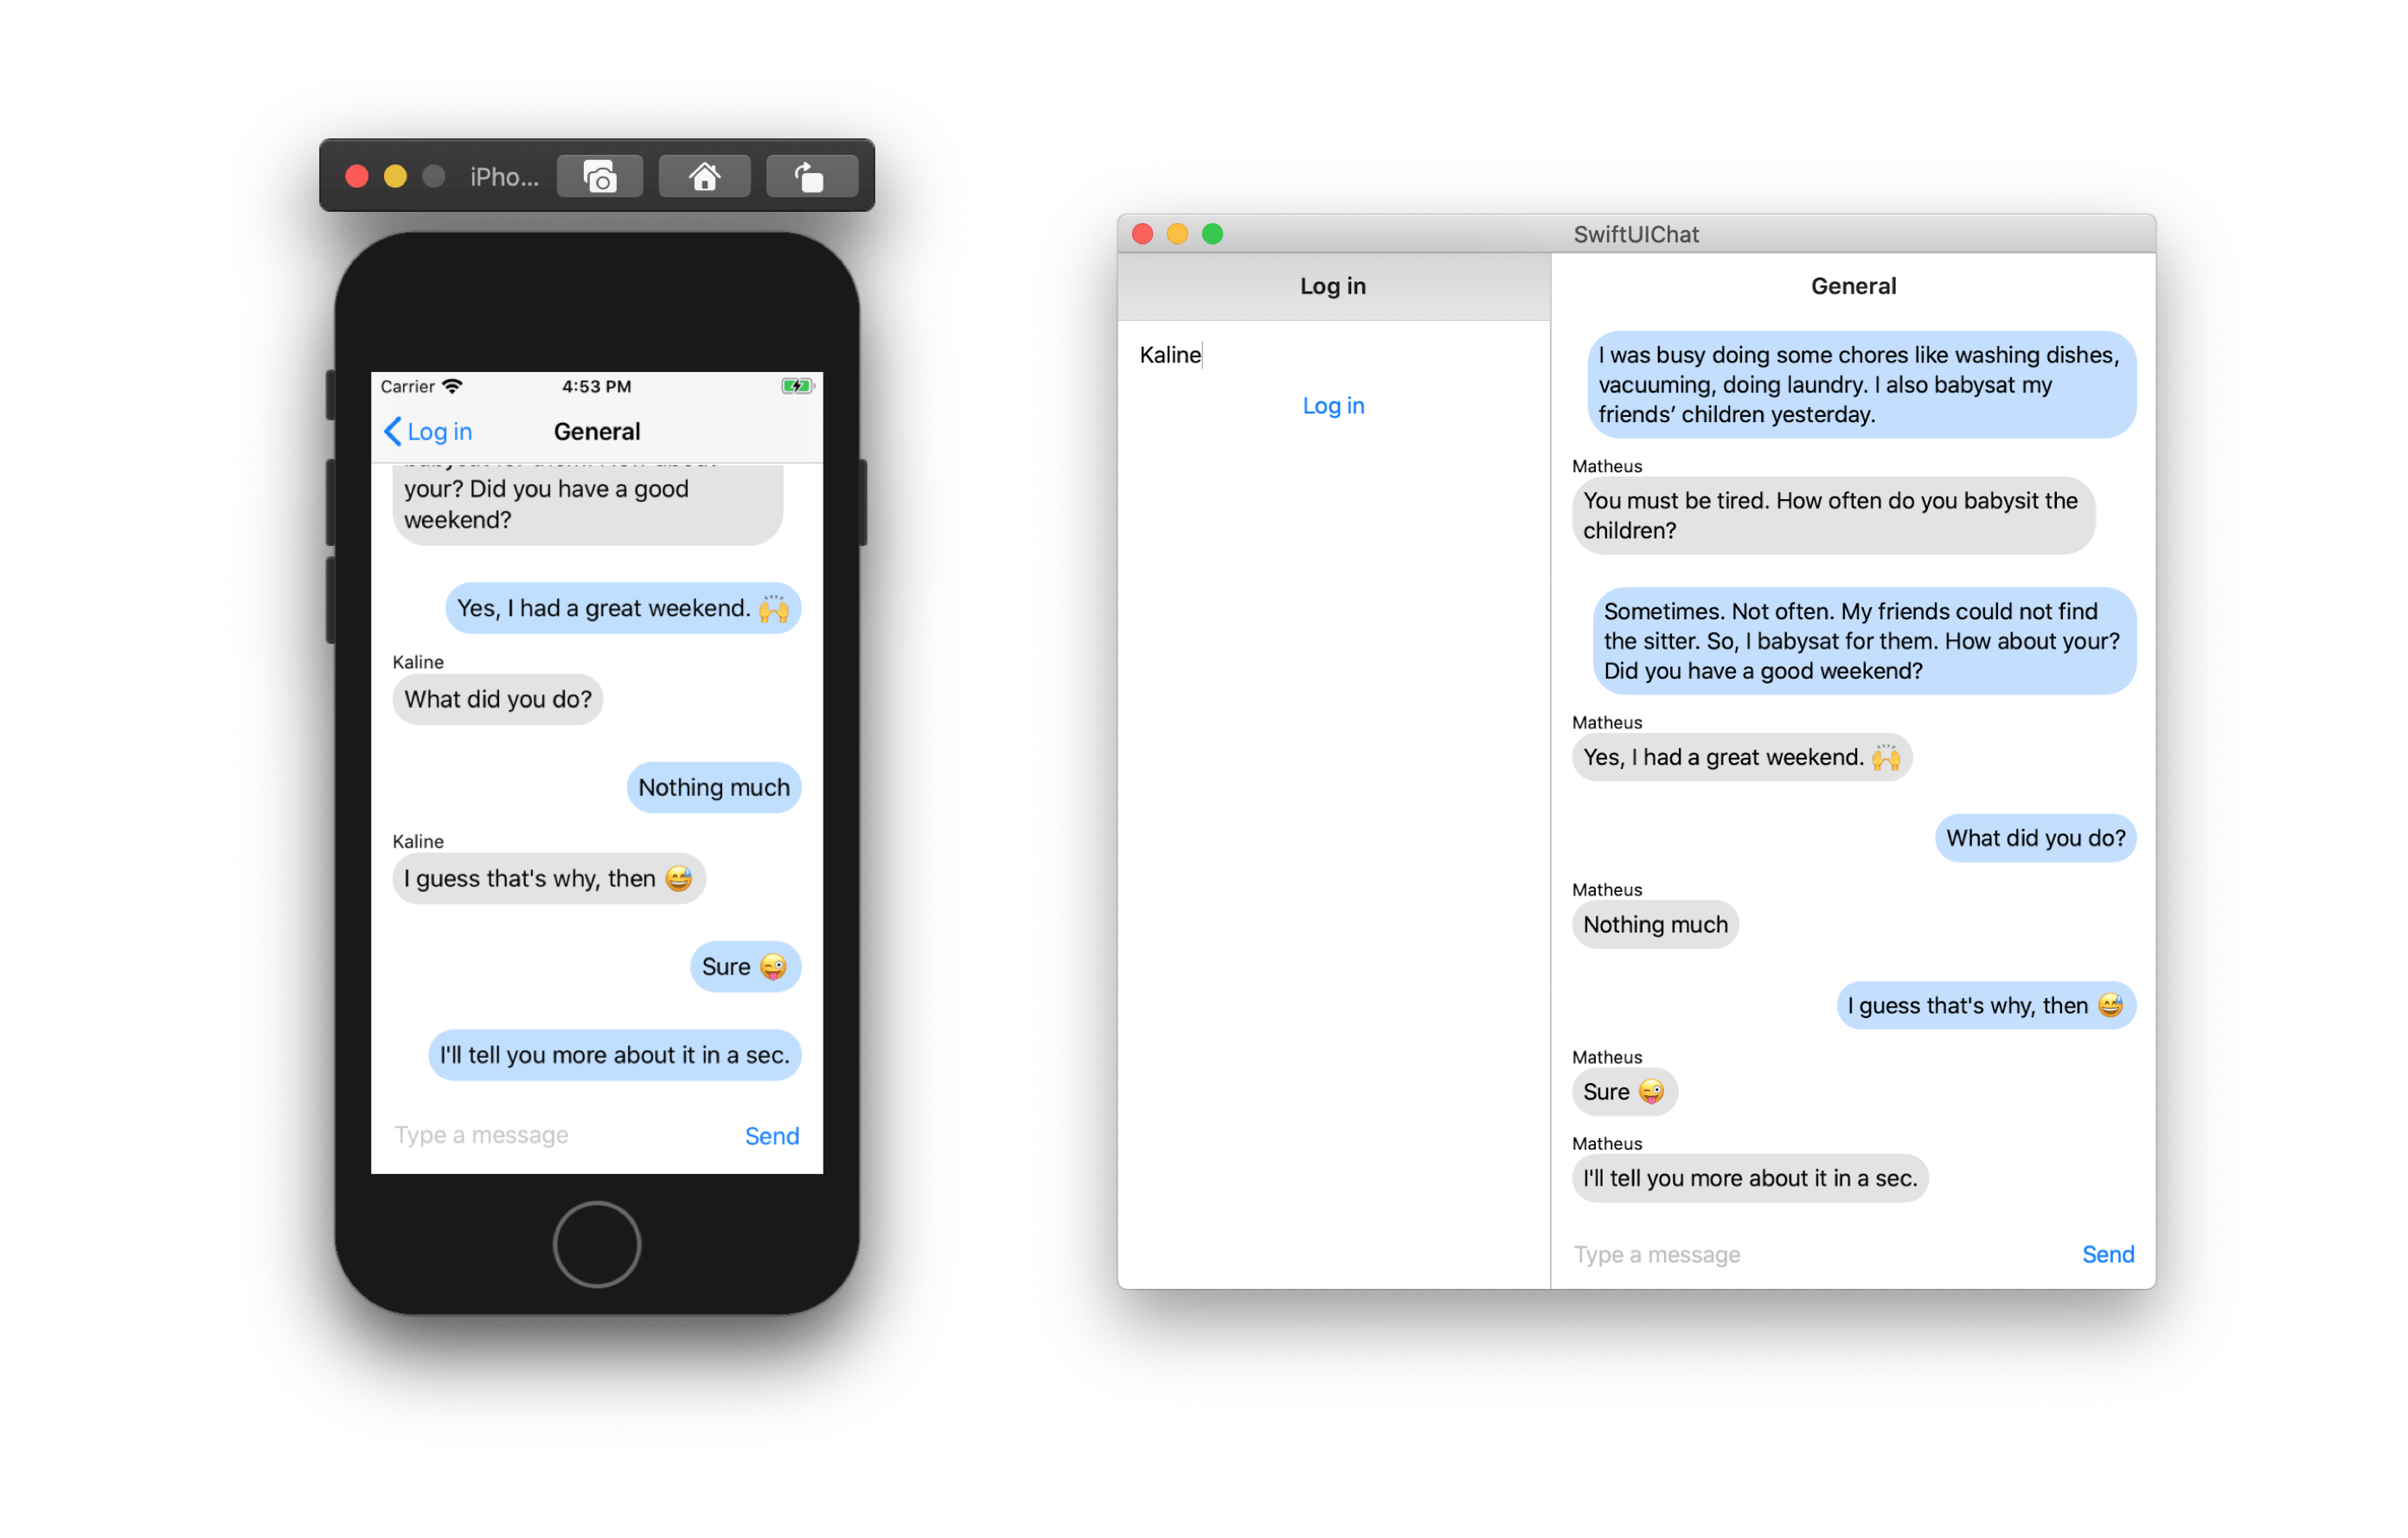 Screenshot shows a chat between two users running on an iPhone simulator and macOS